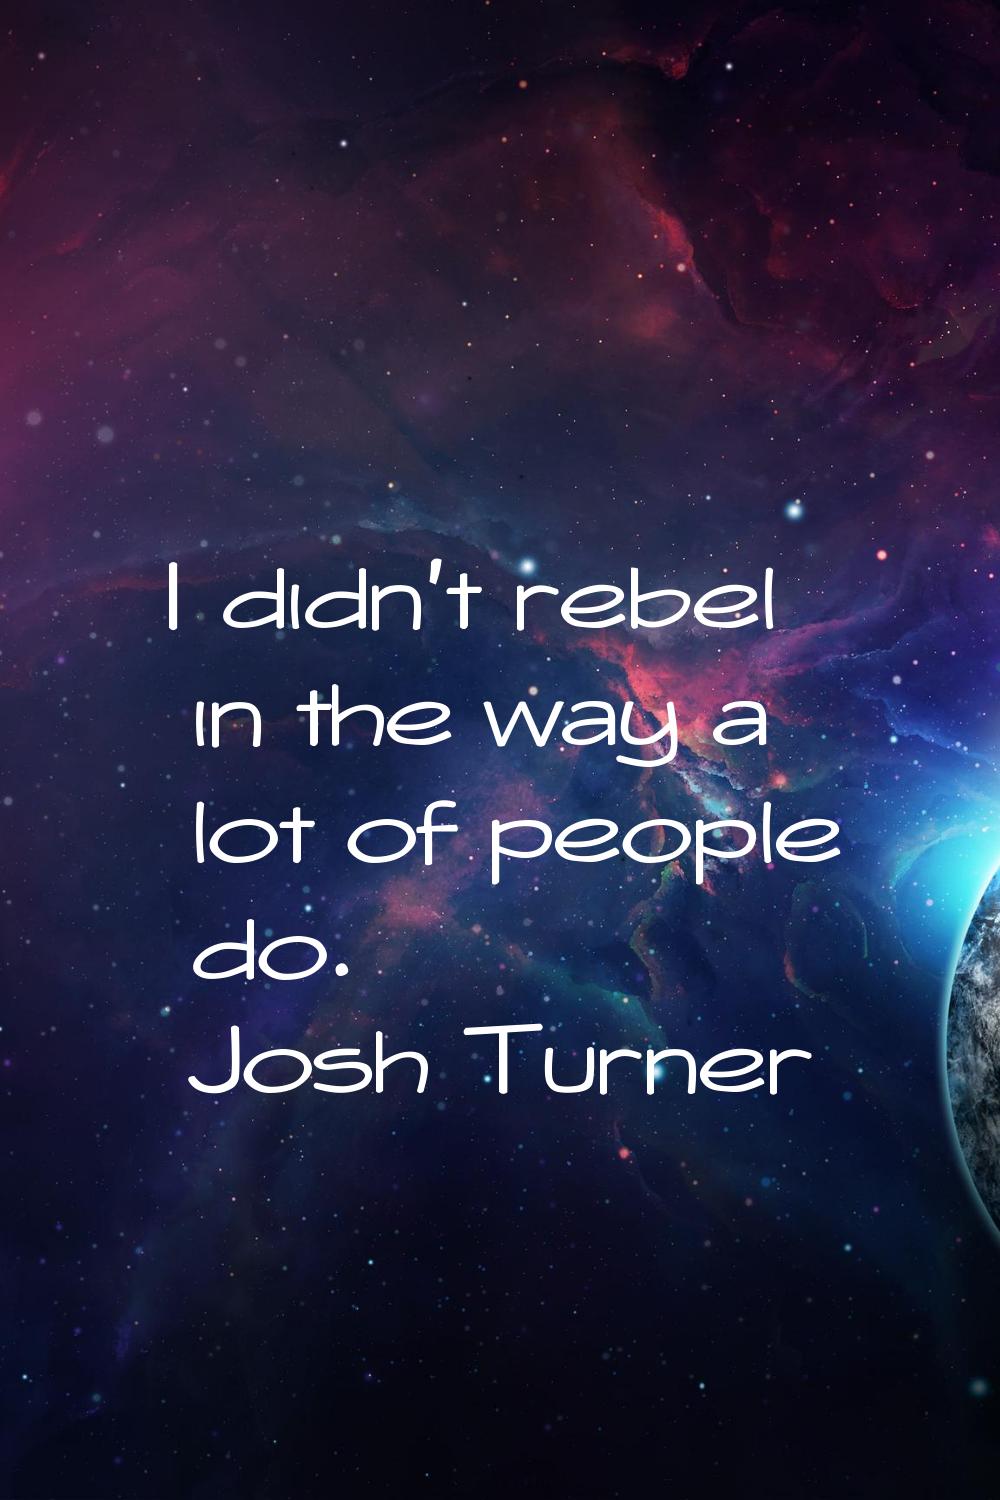 I didn't rebel in the way a lot of people do.